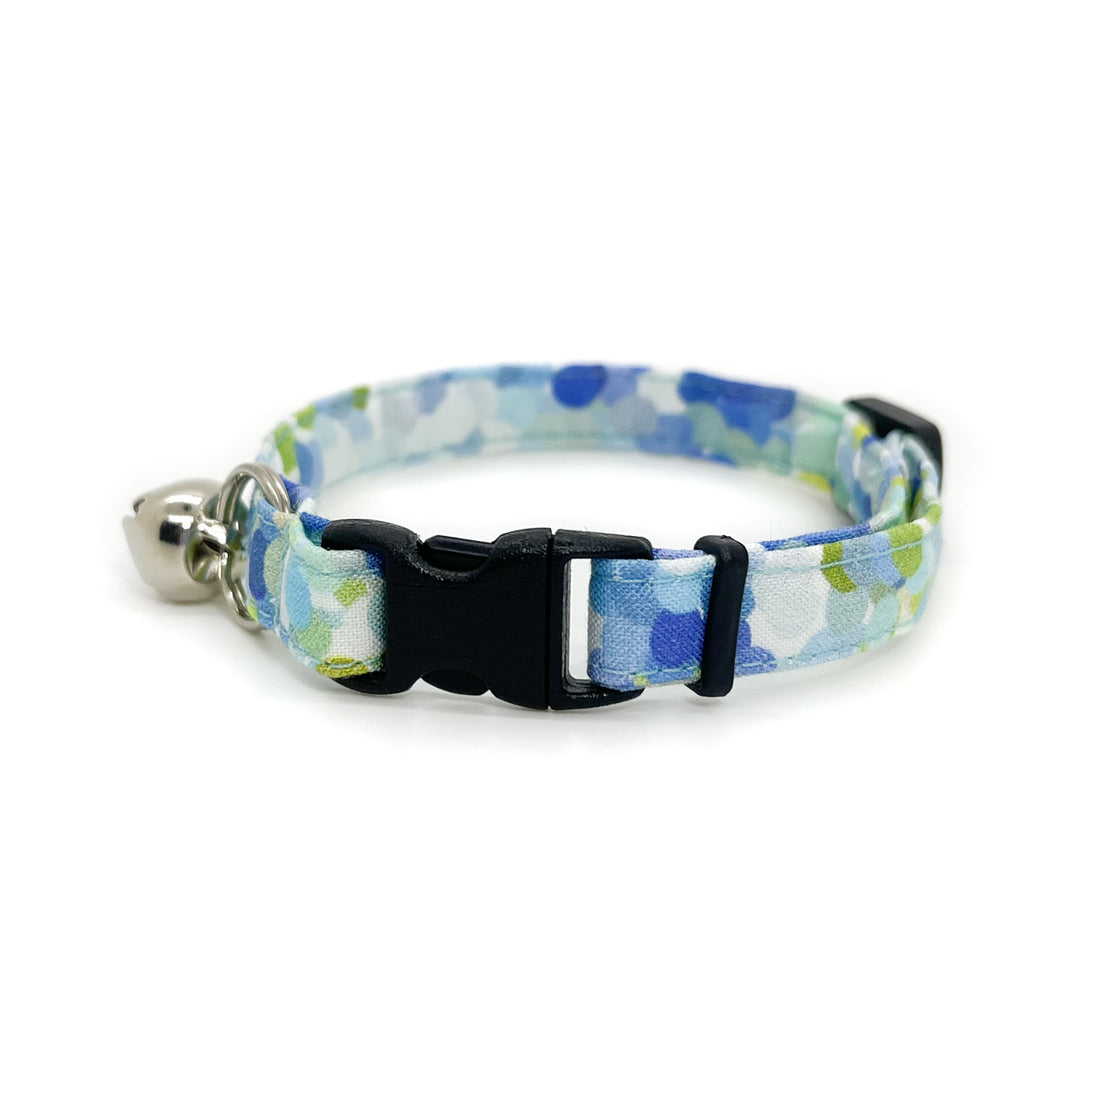 Persnickety Pets: Blue raindrops breakaway cat collar